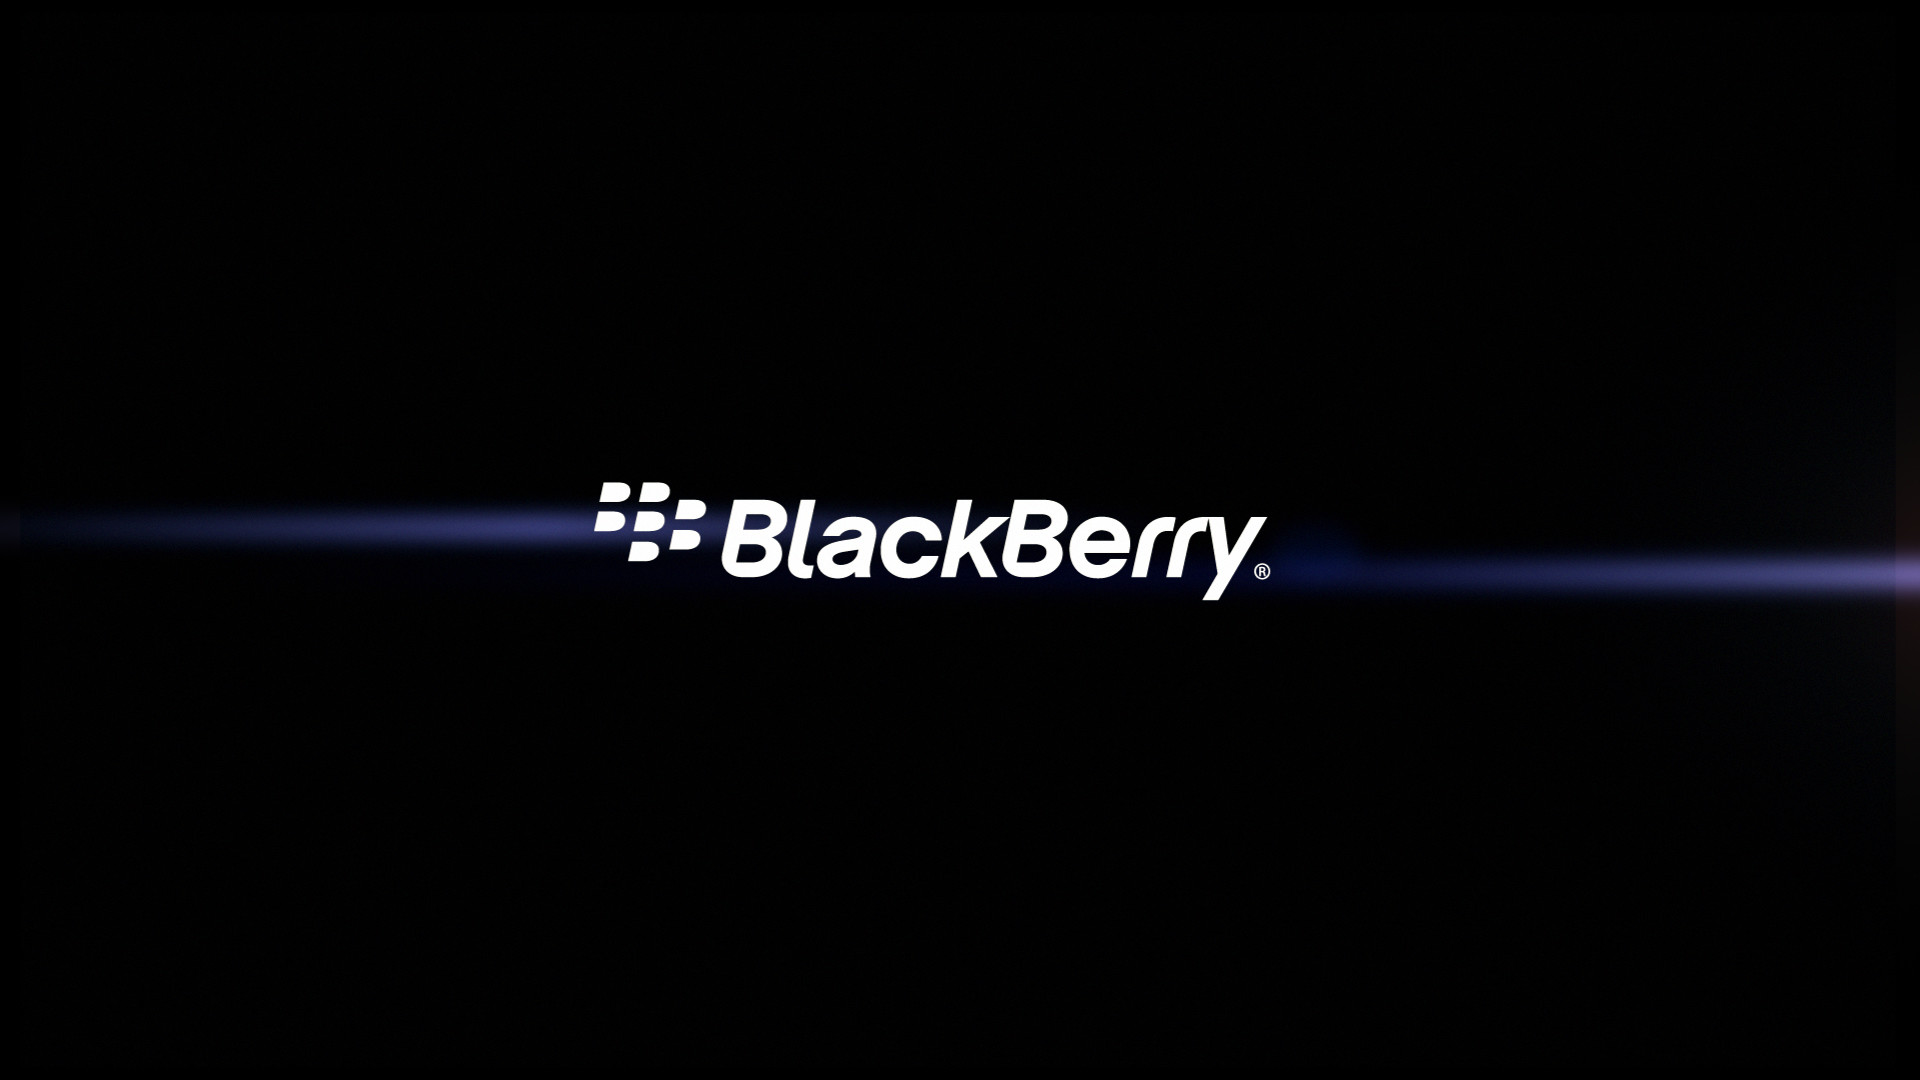 1920x1080 BlackBerry-For-Mobile-Download-BlackBerry-HD-wallpaper-wpc5003225